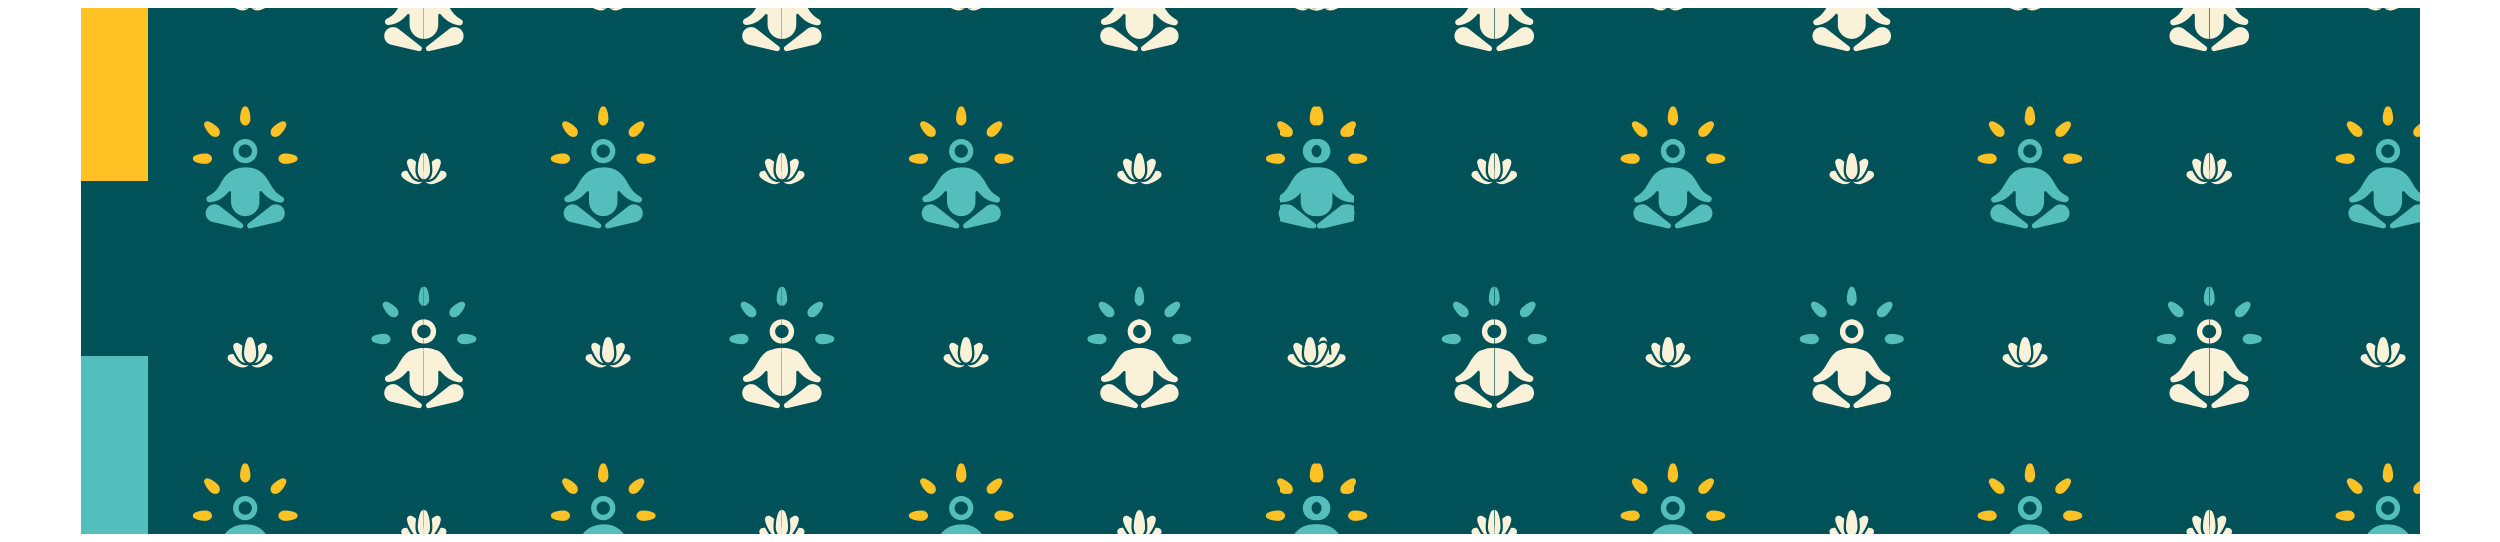 Reflection zone teal pattern person meditating icons